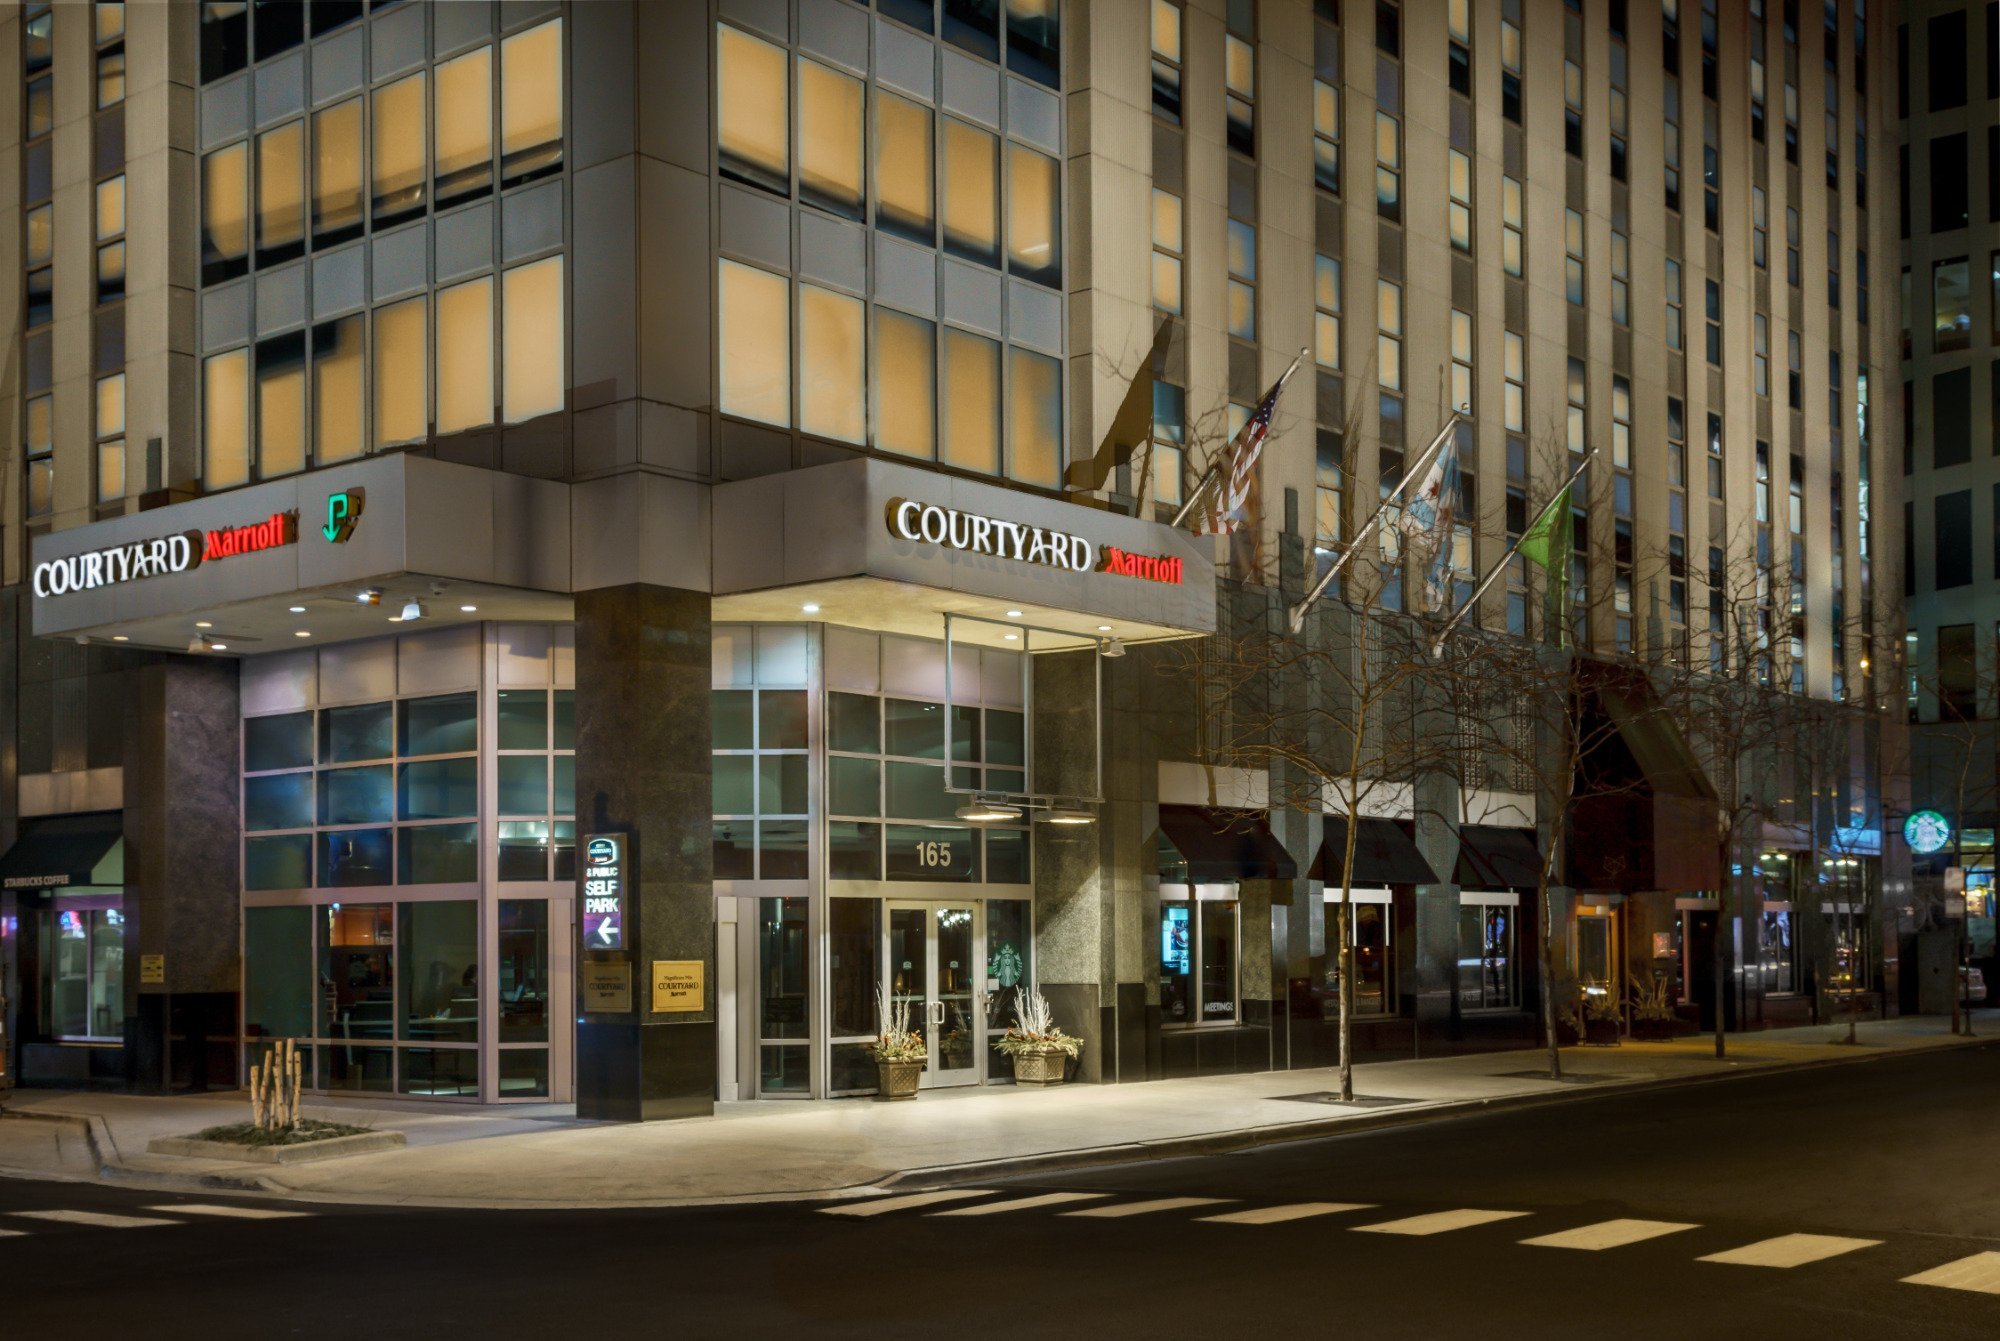 Photo of Courtyard by Marriott Chicago Downtown/Magnificent Mile, Chicago, IL